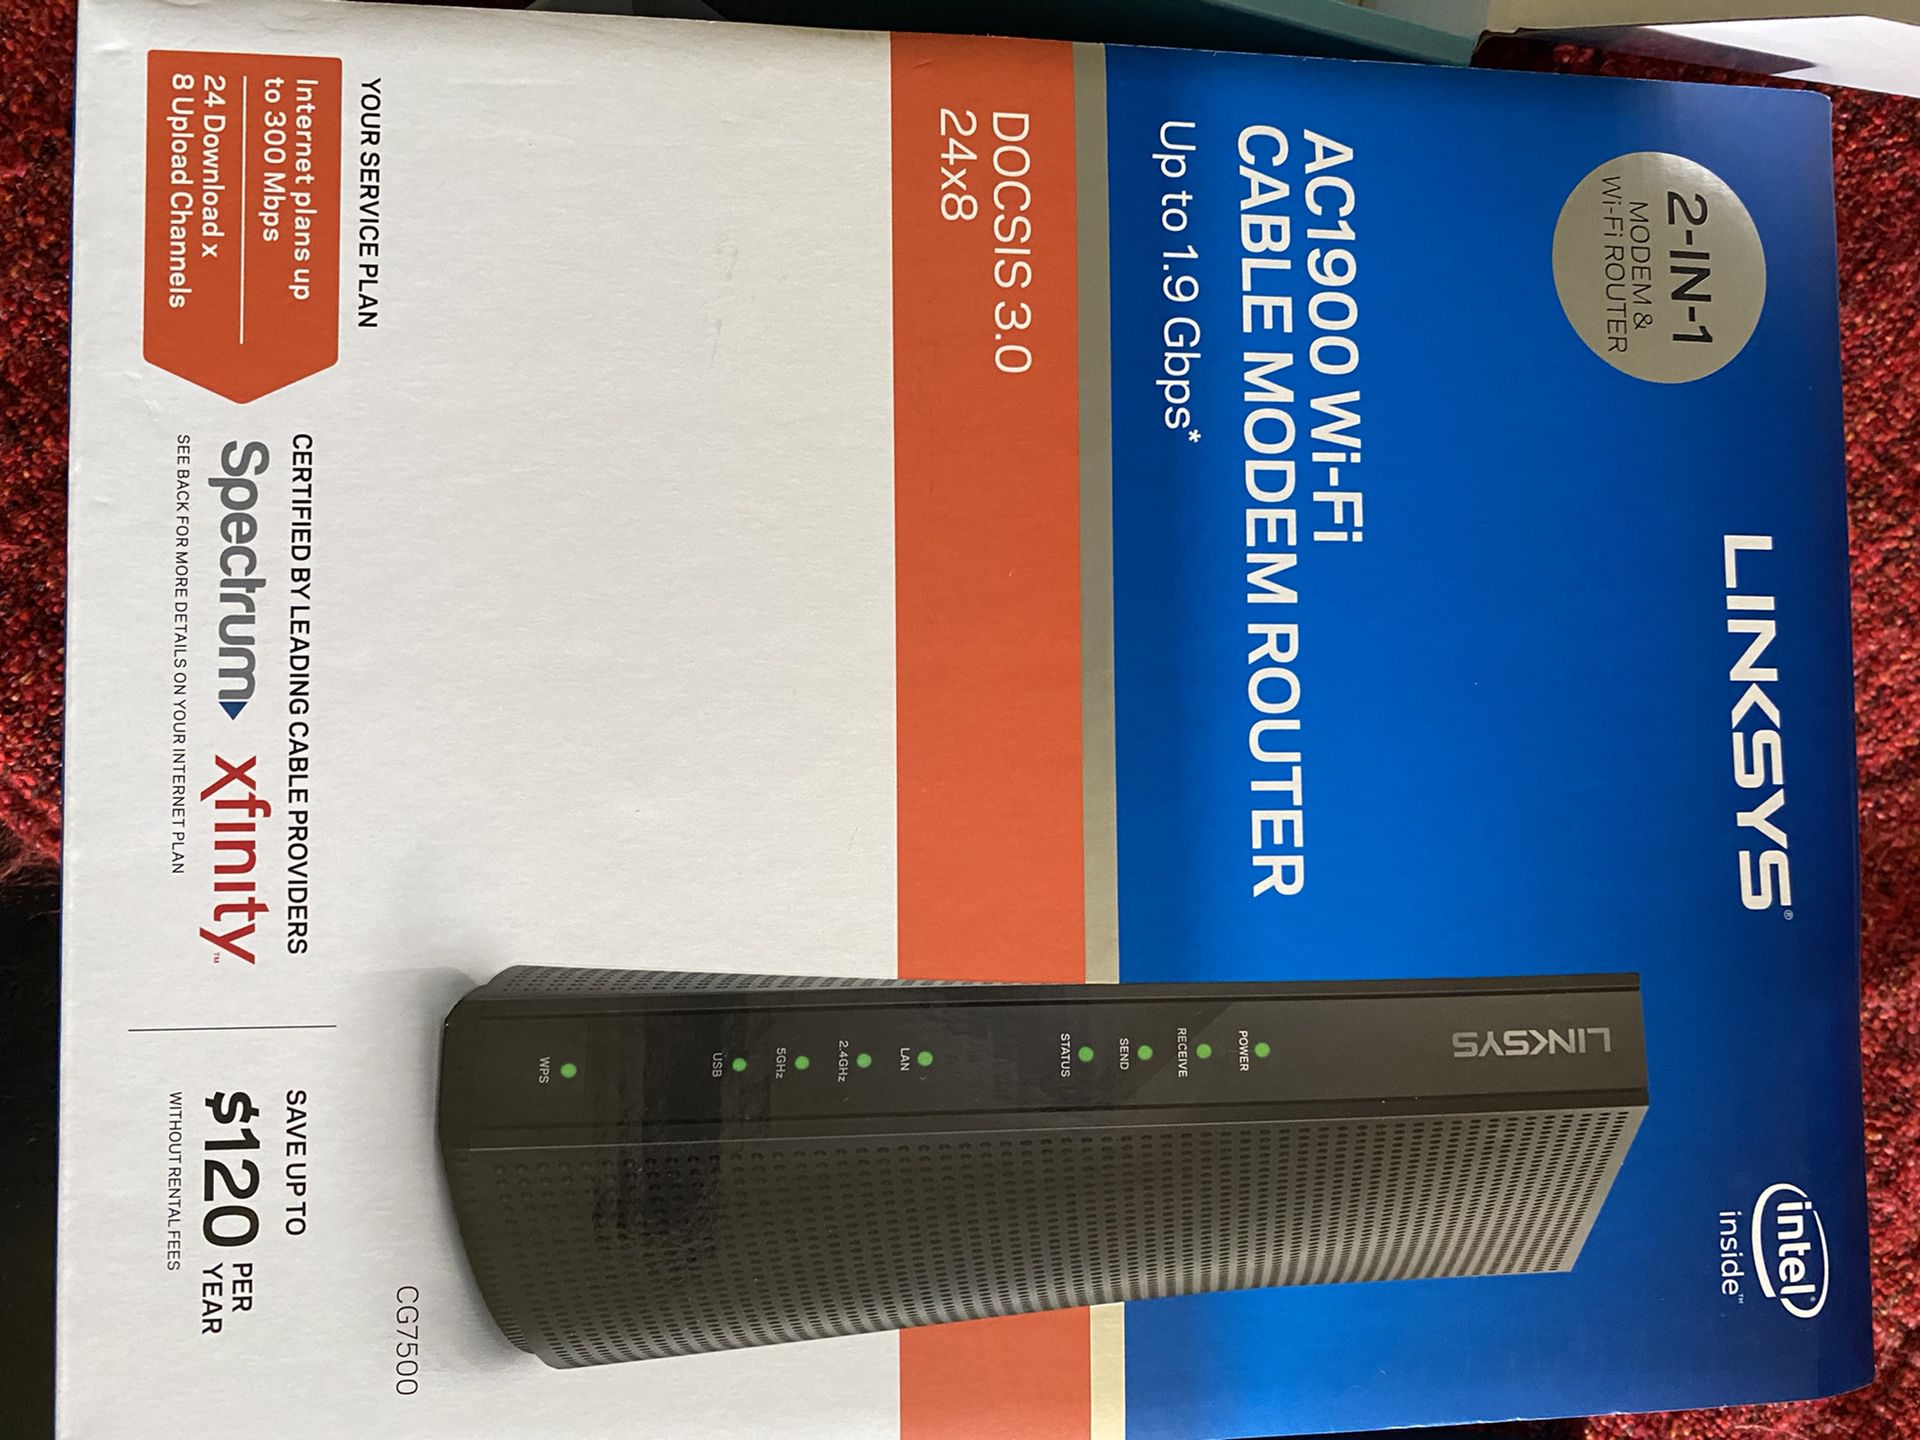 Linksys Modem and Router